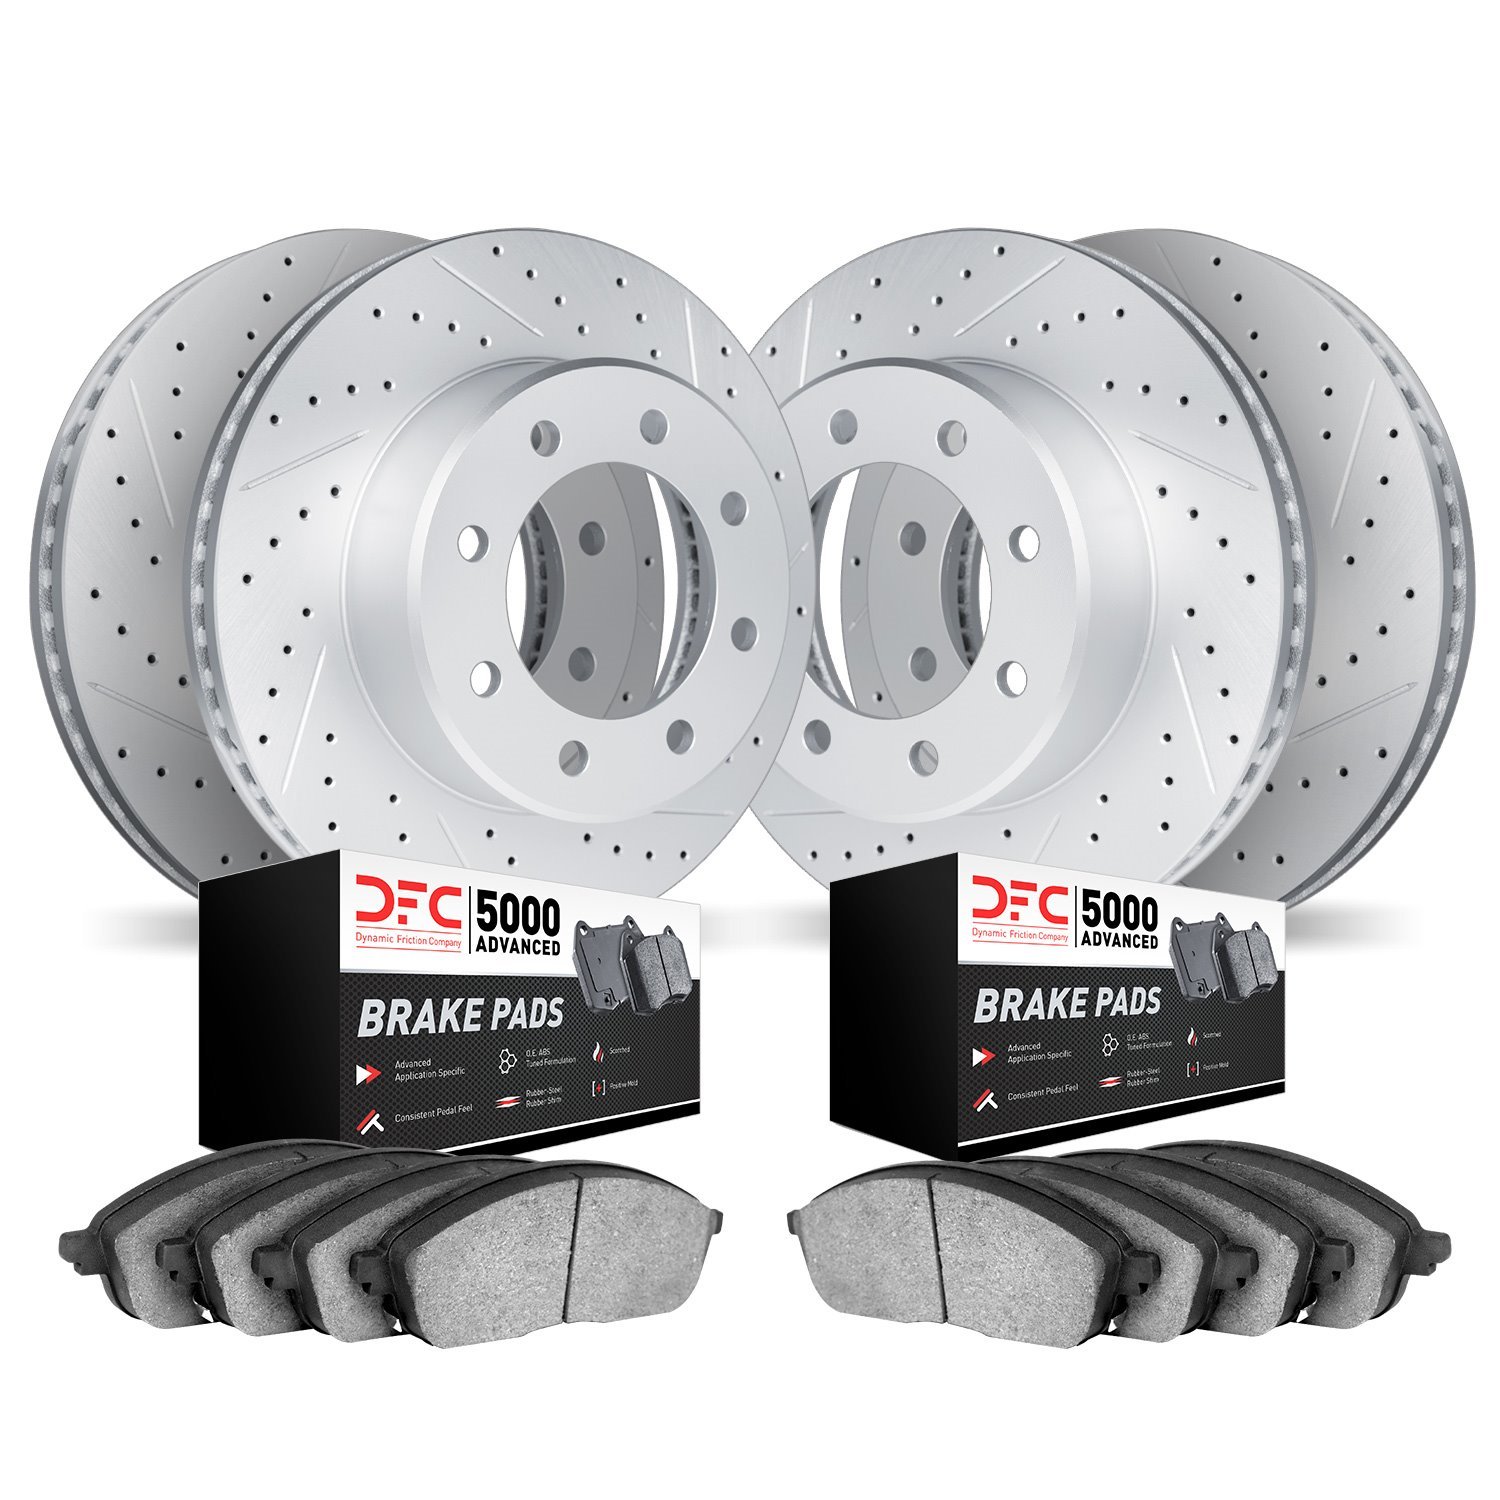 2504-54251 Geoperformance Drilled/Slotted Rotors w/5000 Advanced Brake Pads Kit, 1999-2002 Ford/Lincoln/Mercury/Mazda, Position: